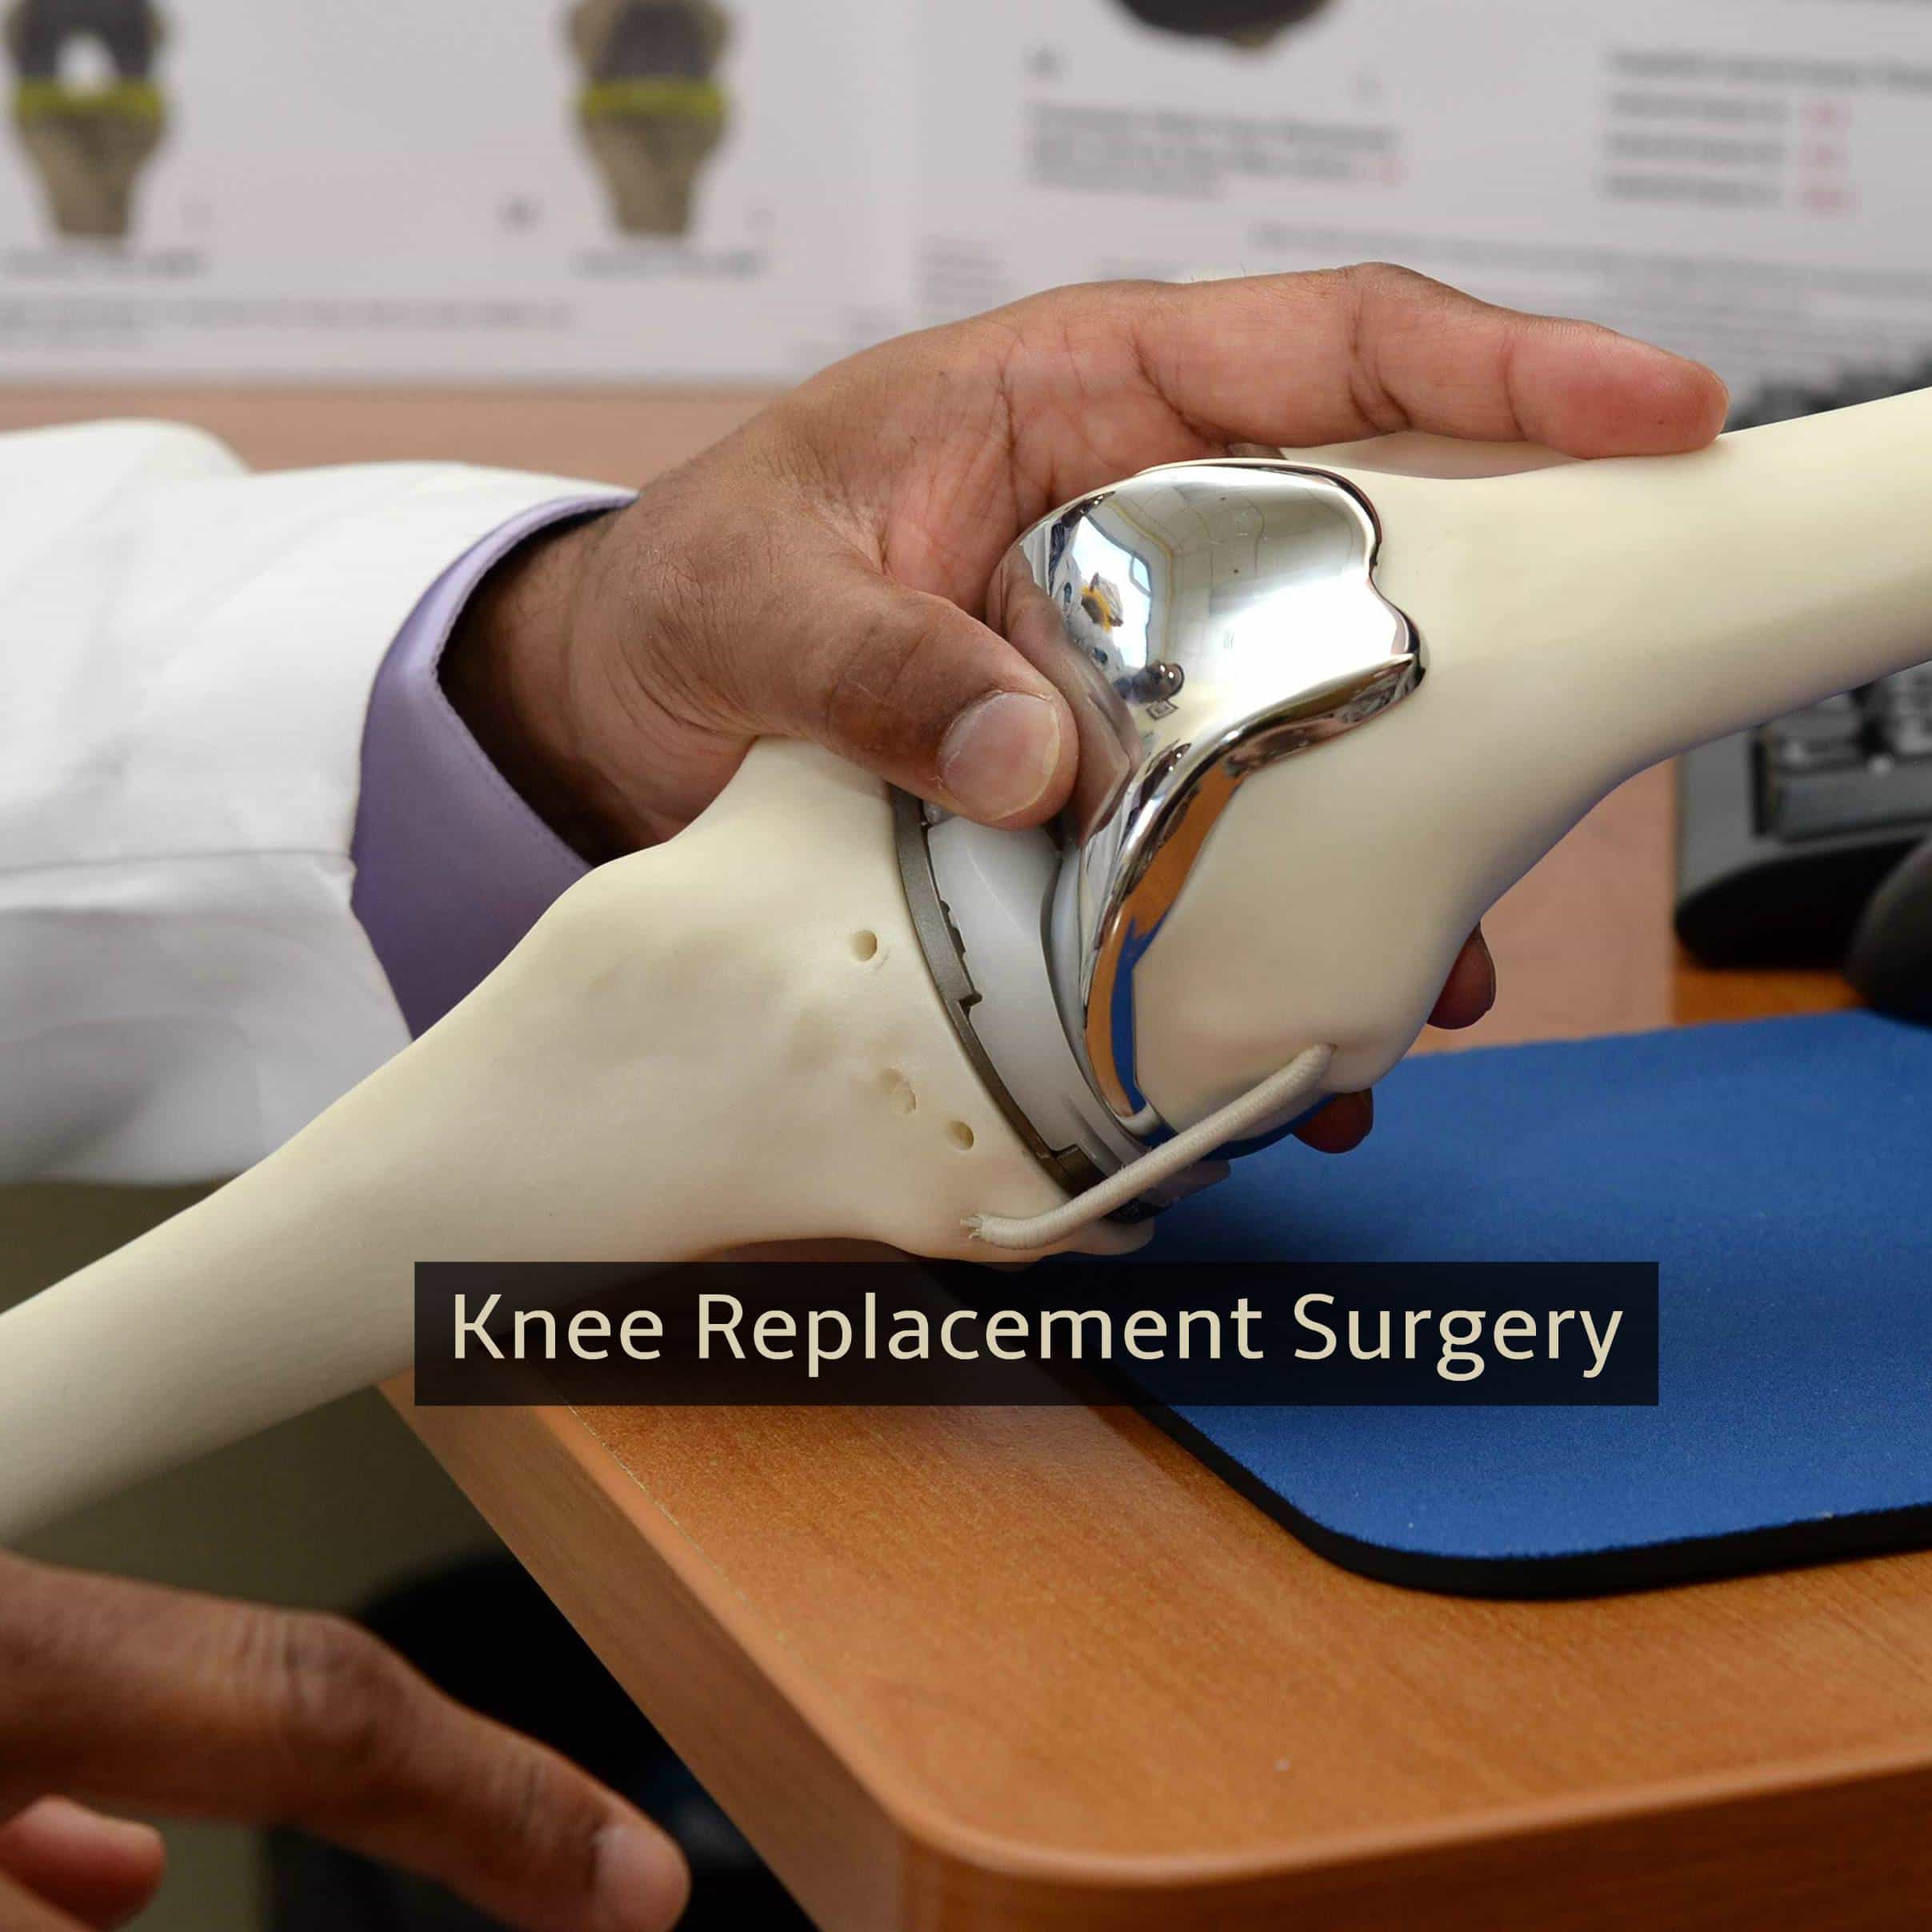 Knee Replacement Surgery  What to Expect During Recovery?